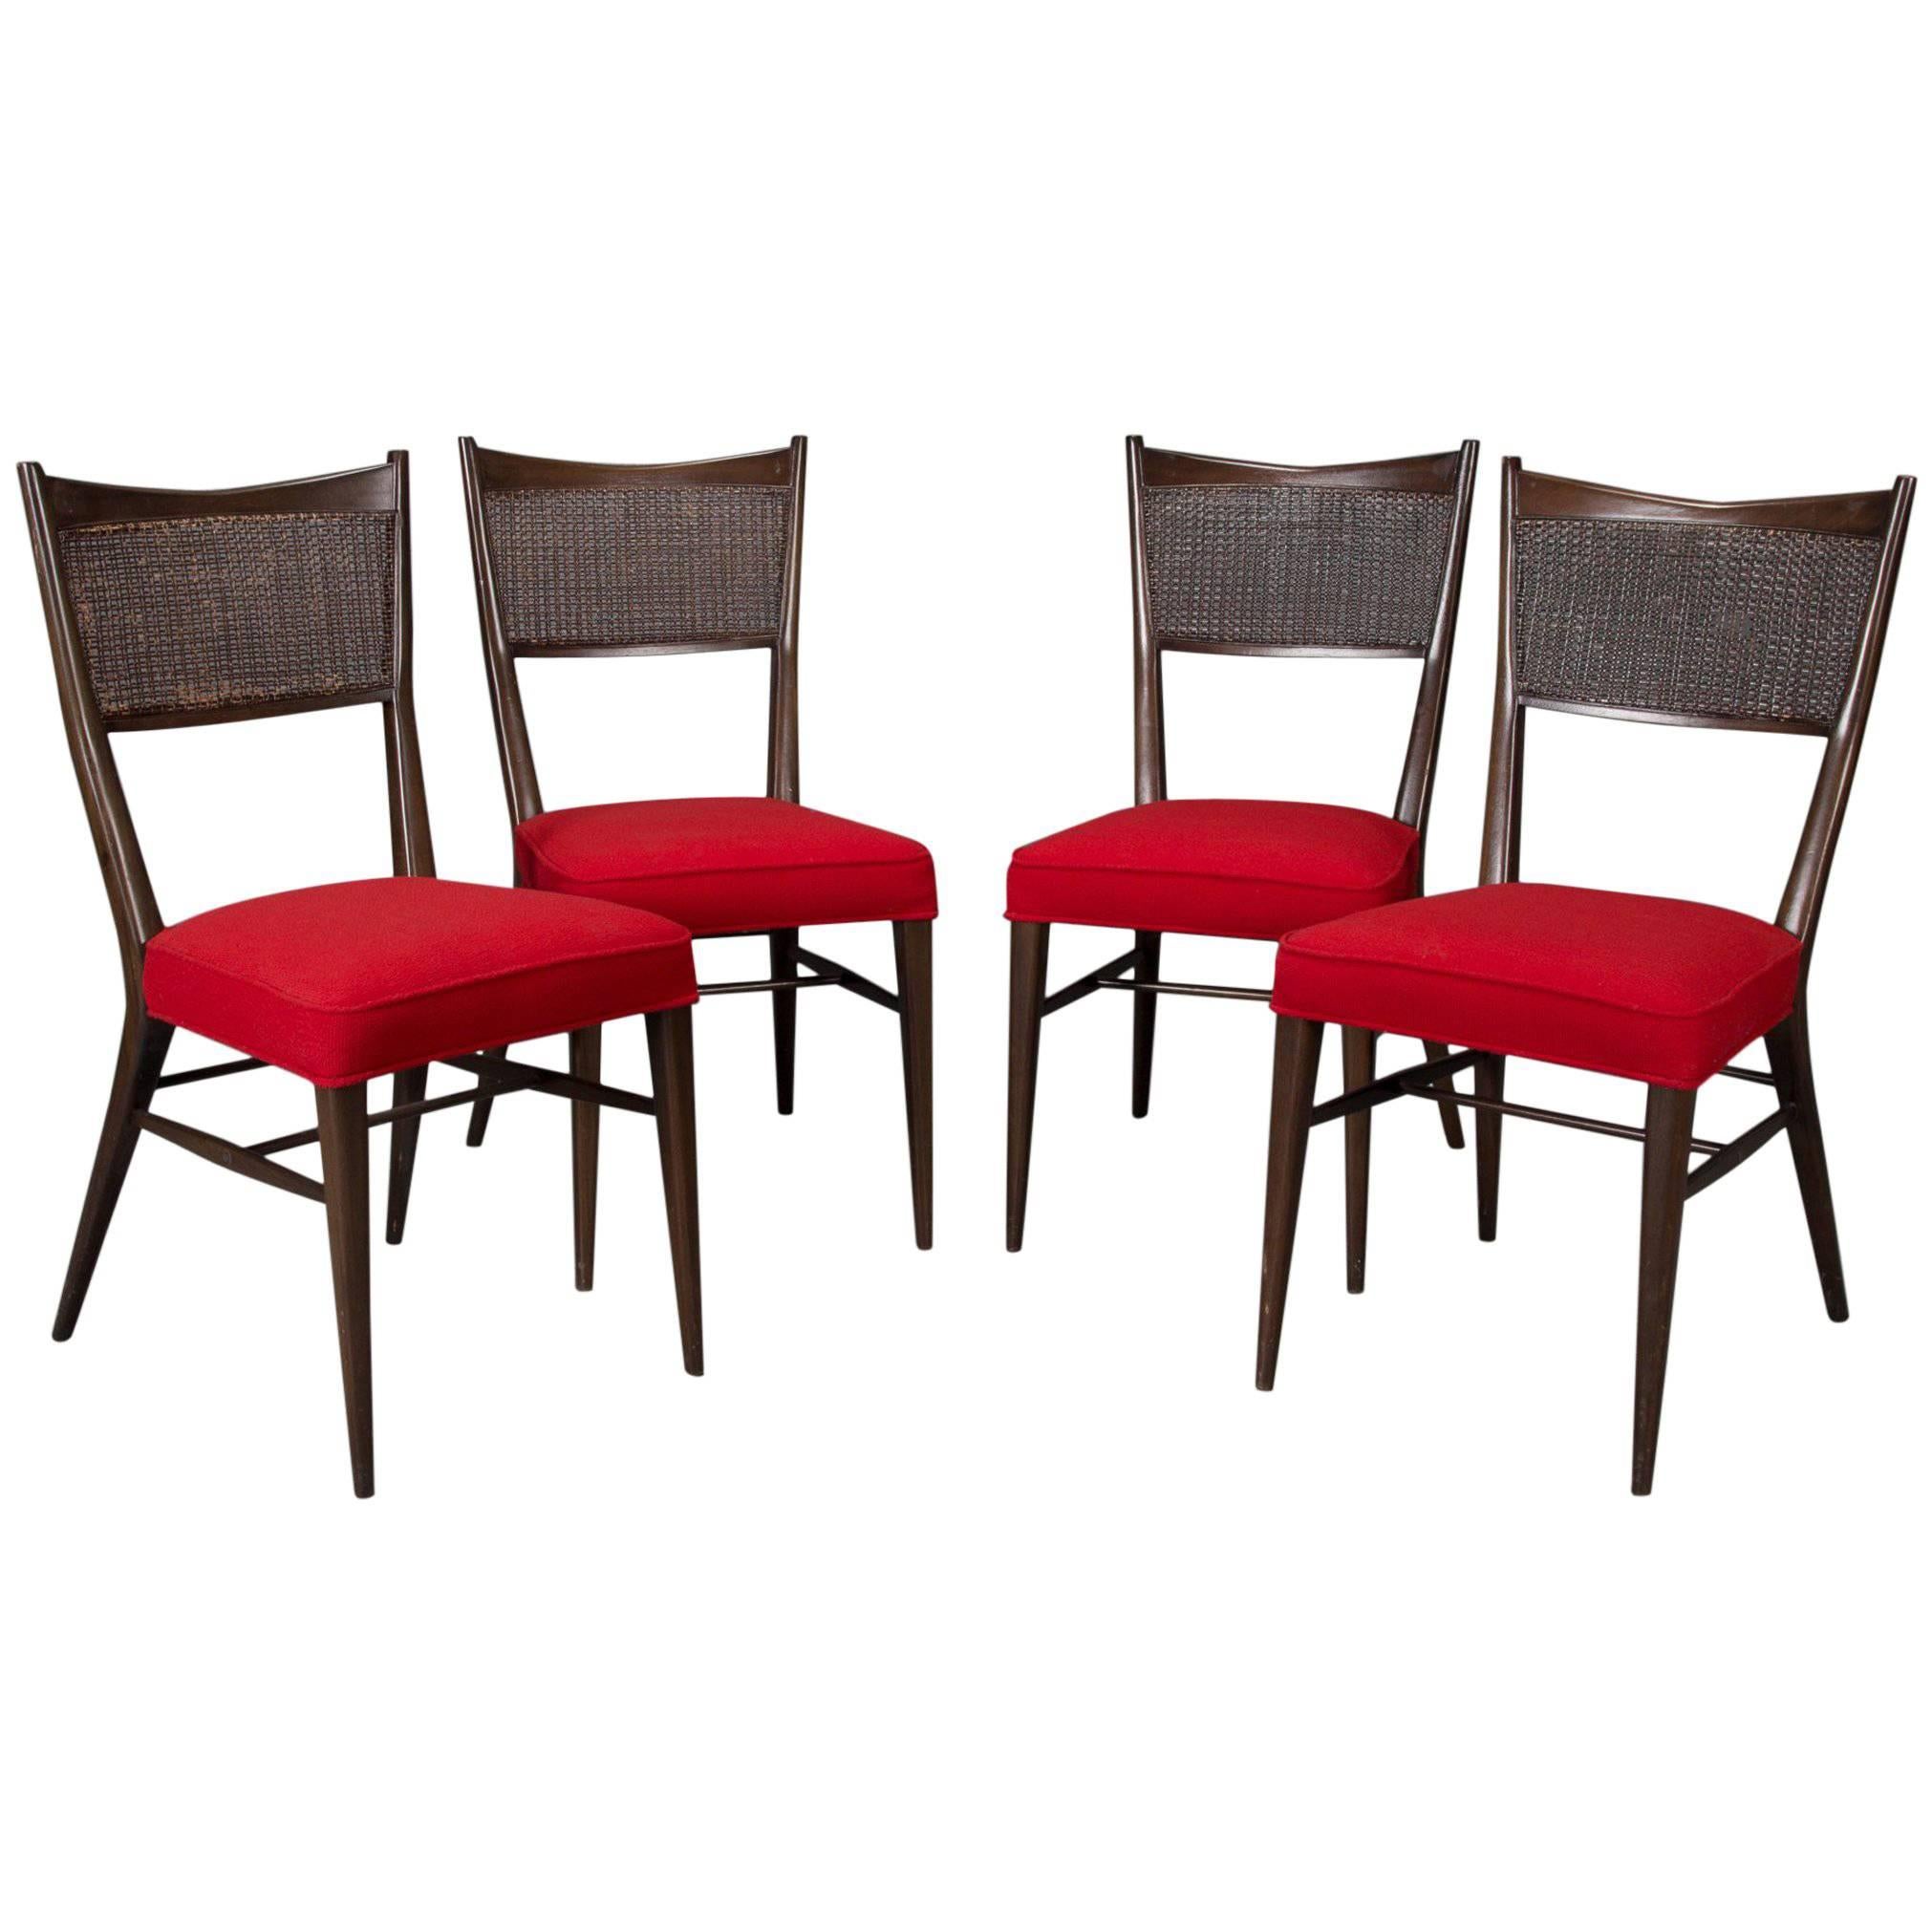 Set of Four Irwin Collection Dining Chairs by Paul McCobb for Directional